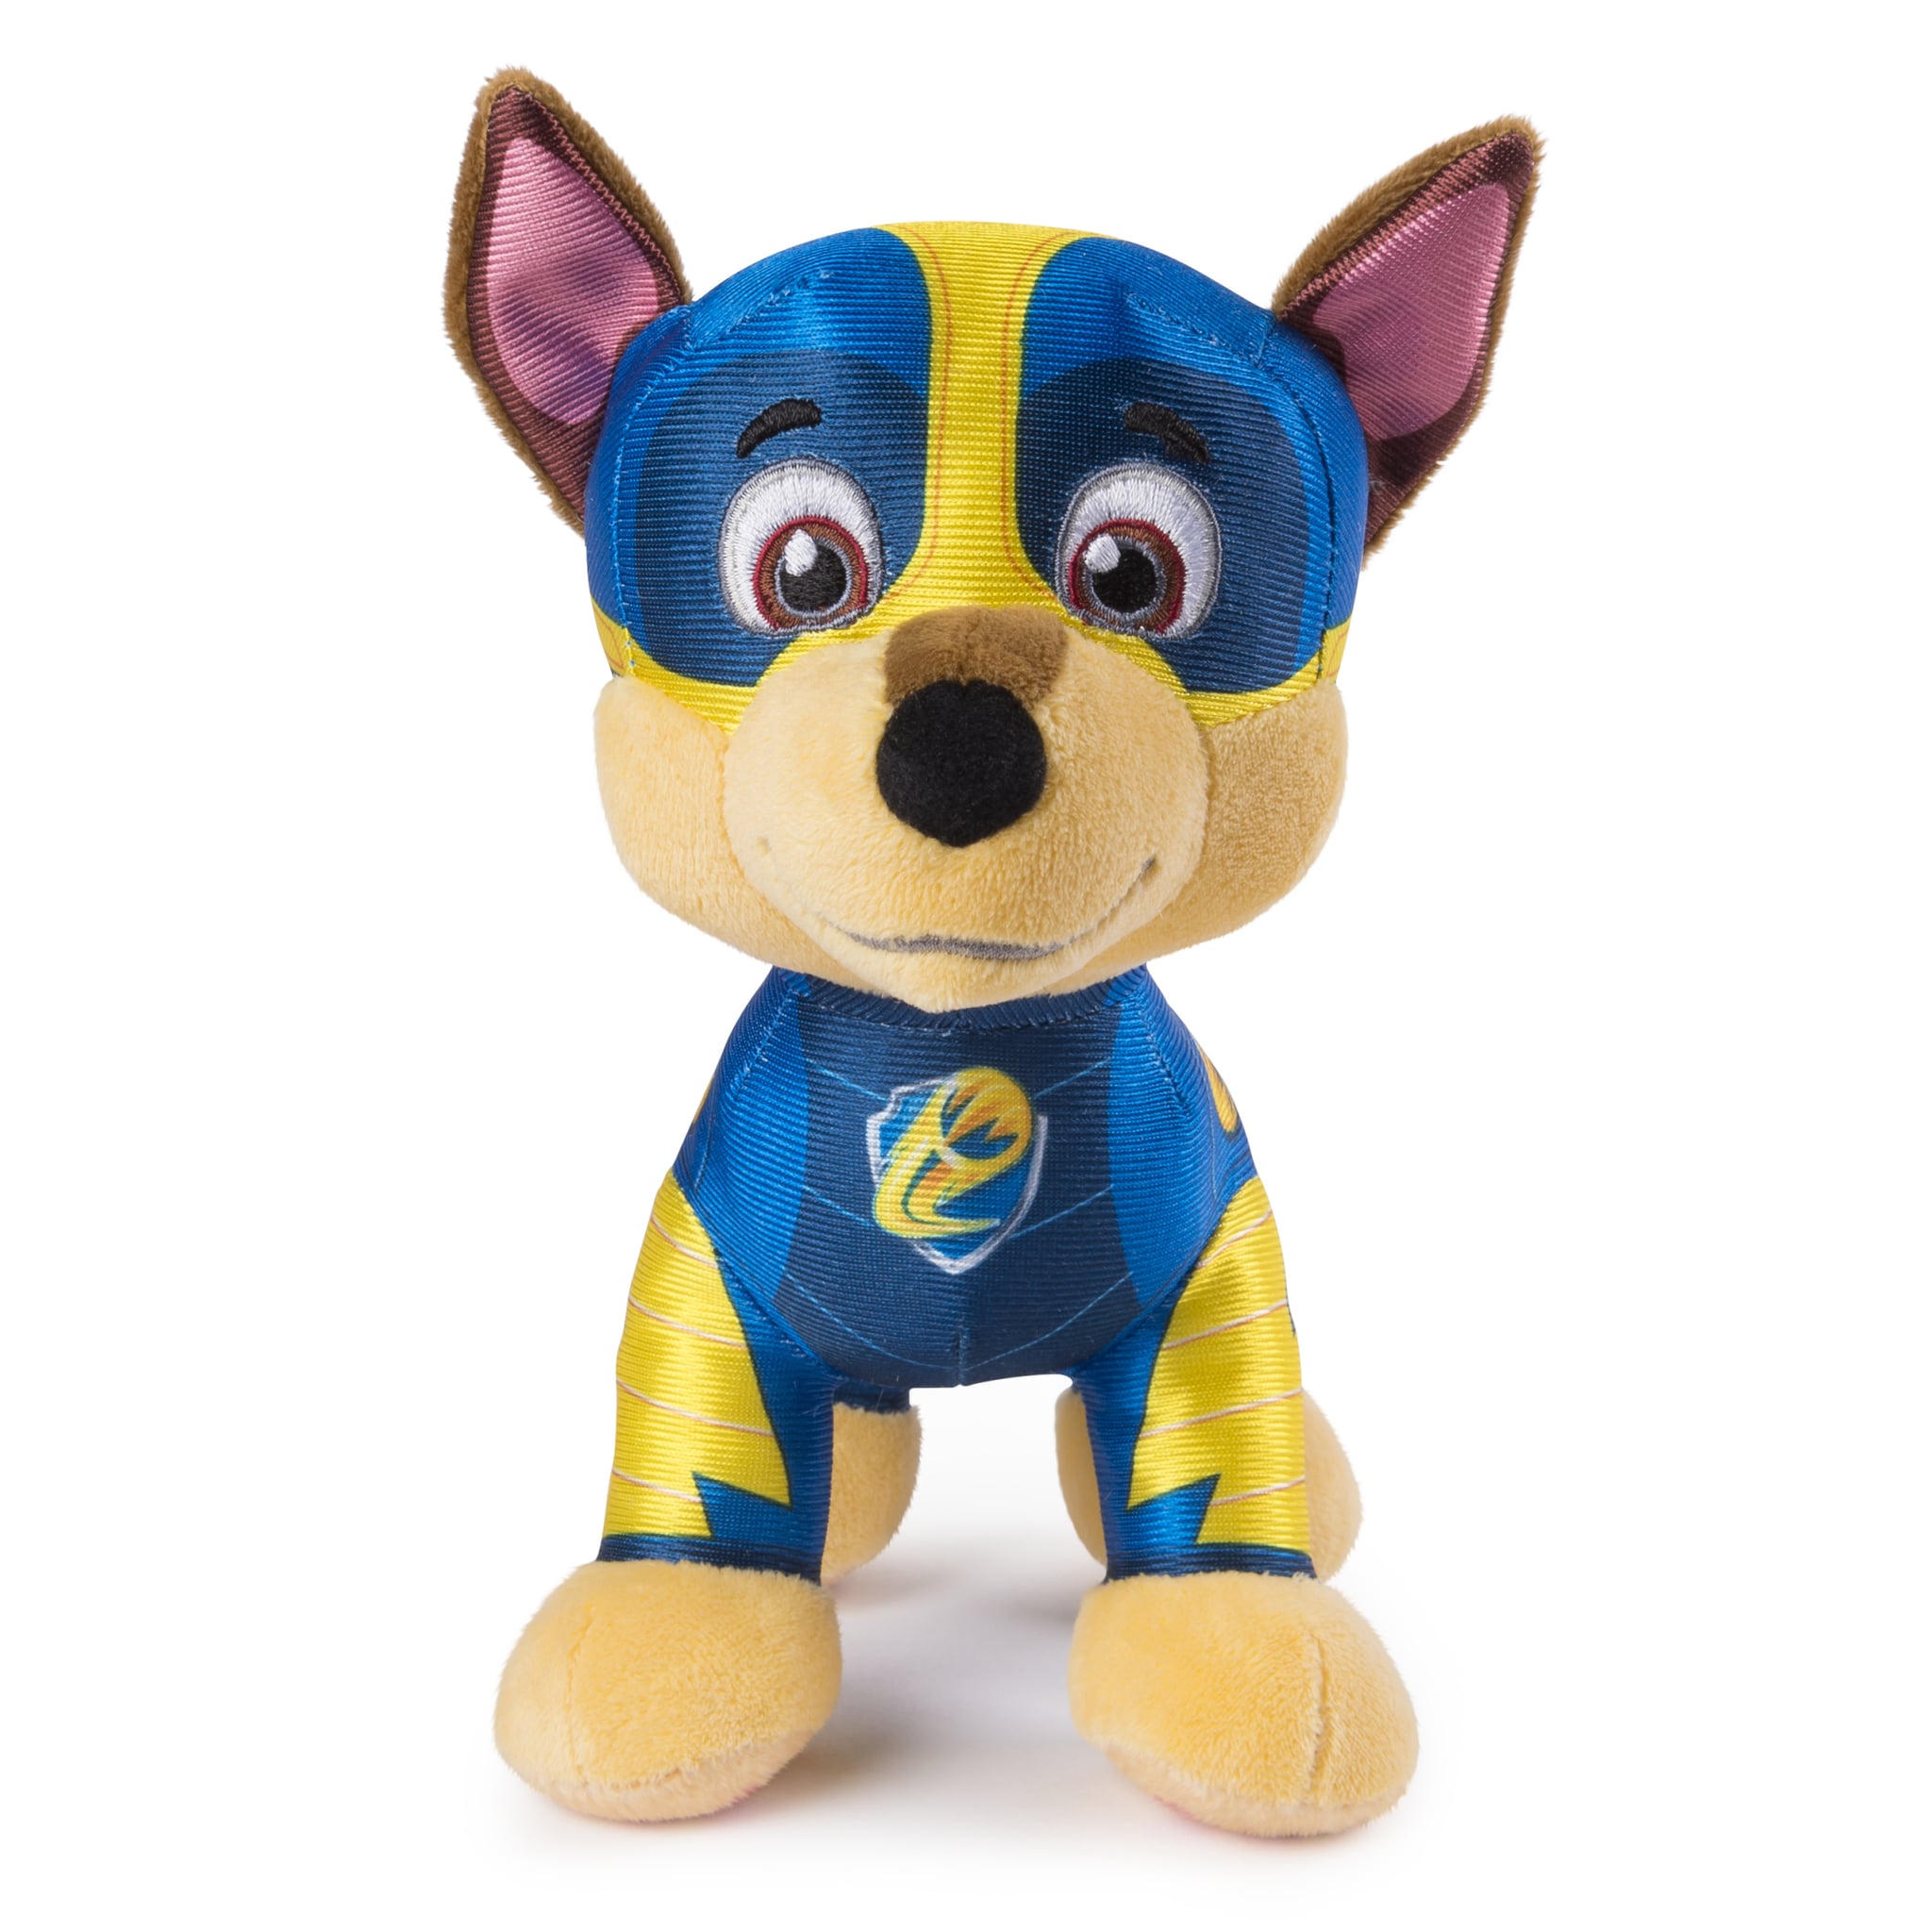 chase paw patrol pup